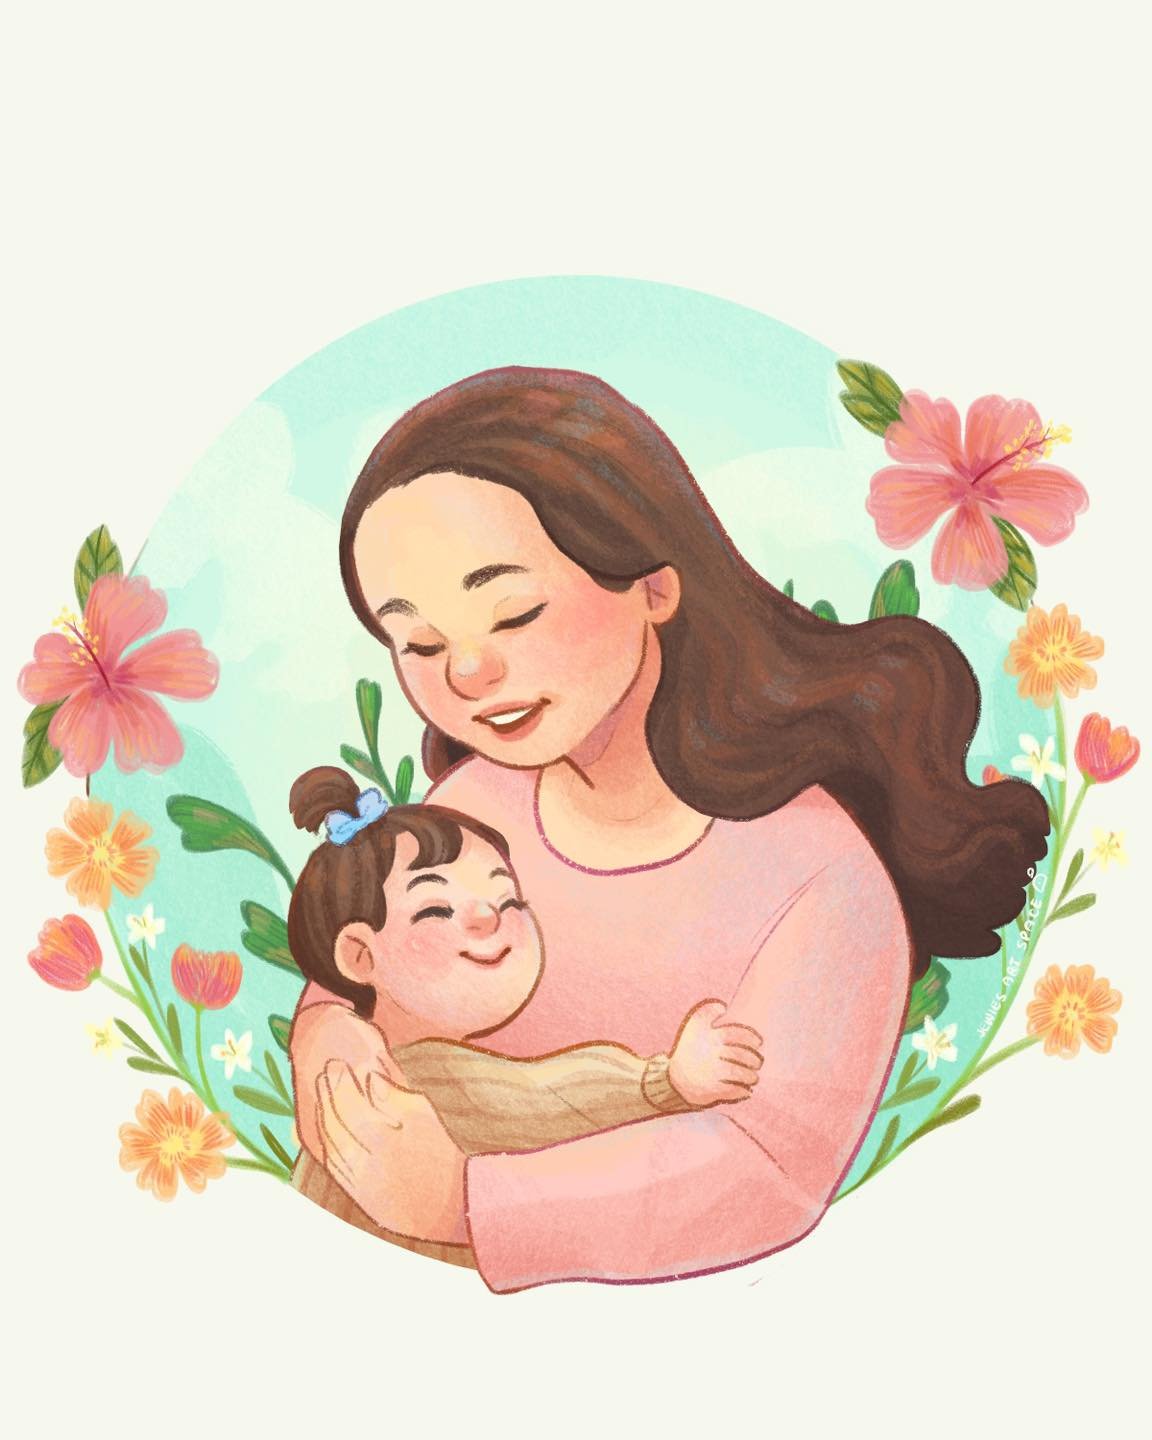 Happy Mother&rsquo;s Day, mama, mom, nanay, inay! 

We owe you a lot!
Thank you for choosing us first even when it means you have to sacrifice something. ☹️

We see all the big and little ways you love us.

So we pray that today and for the rest of y